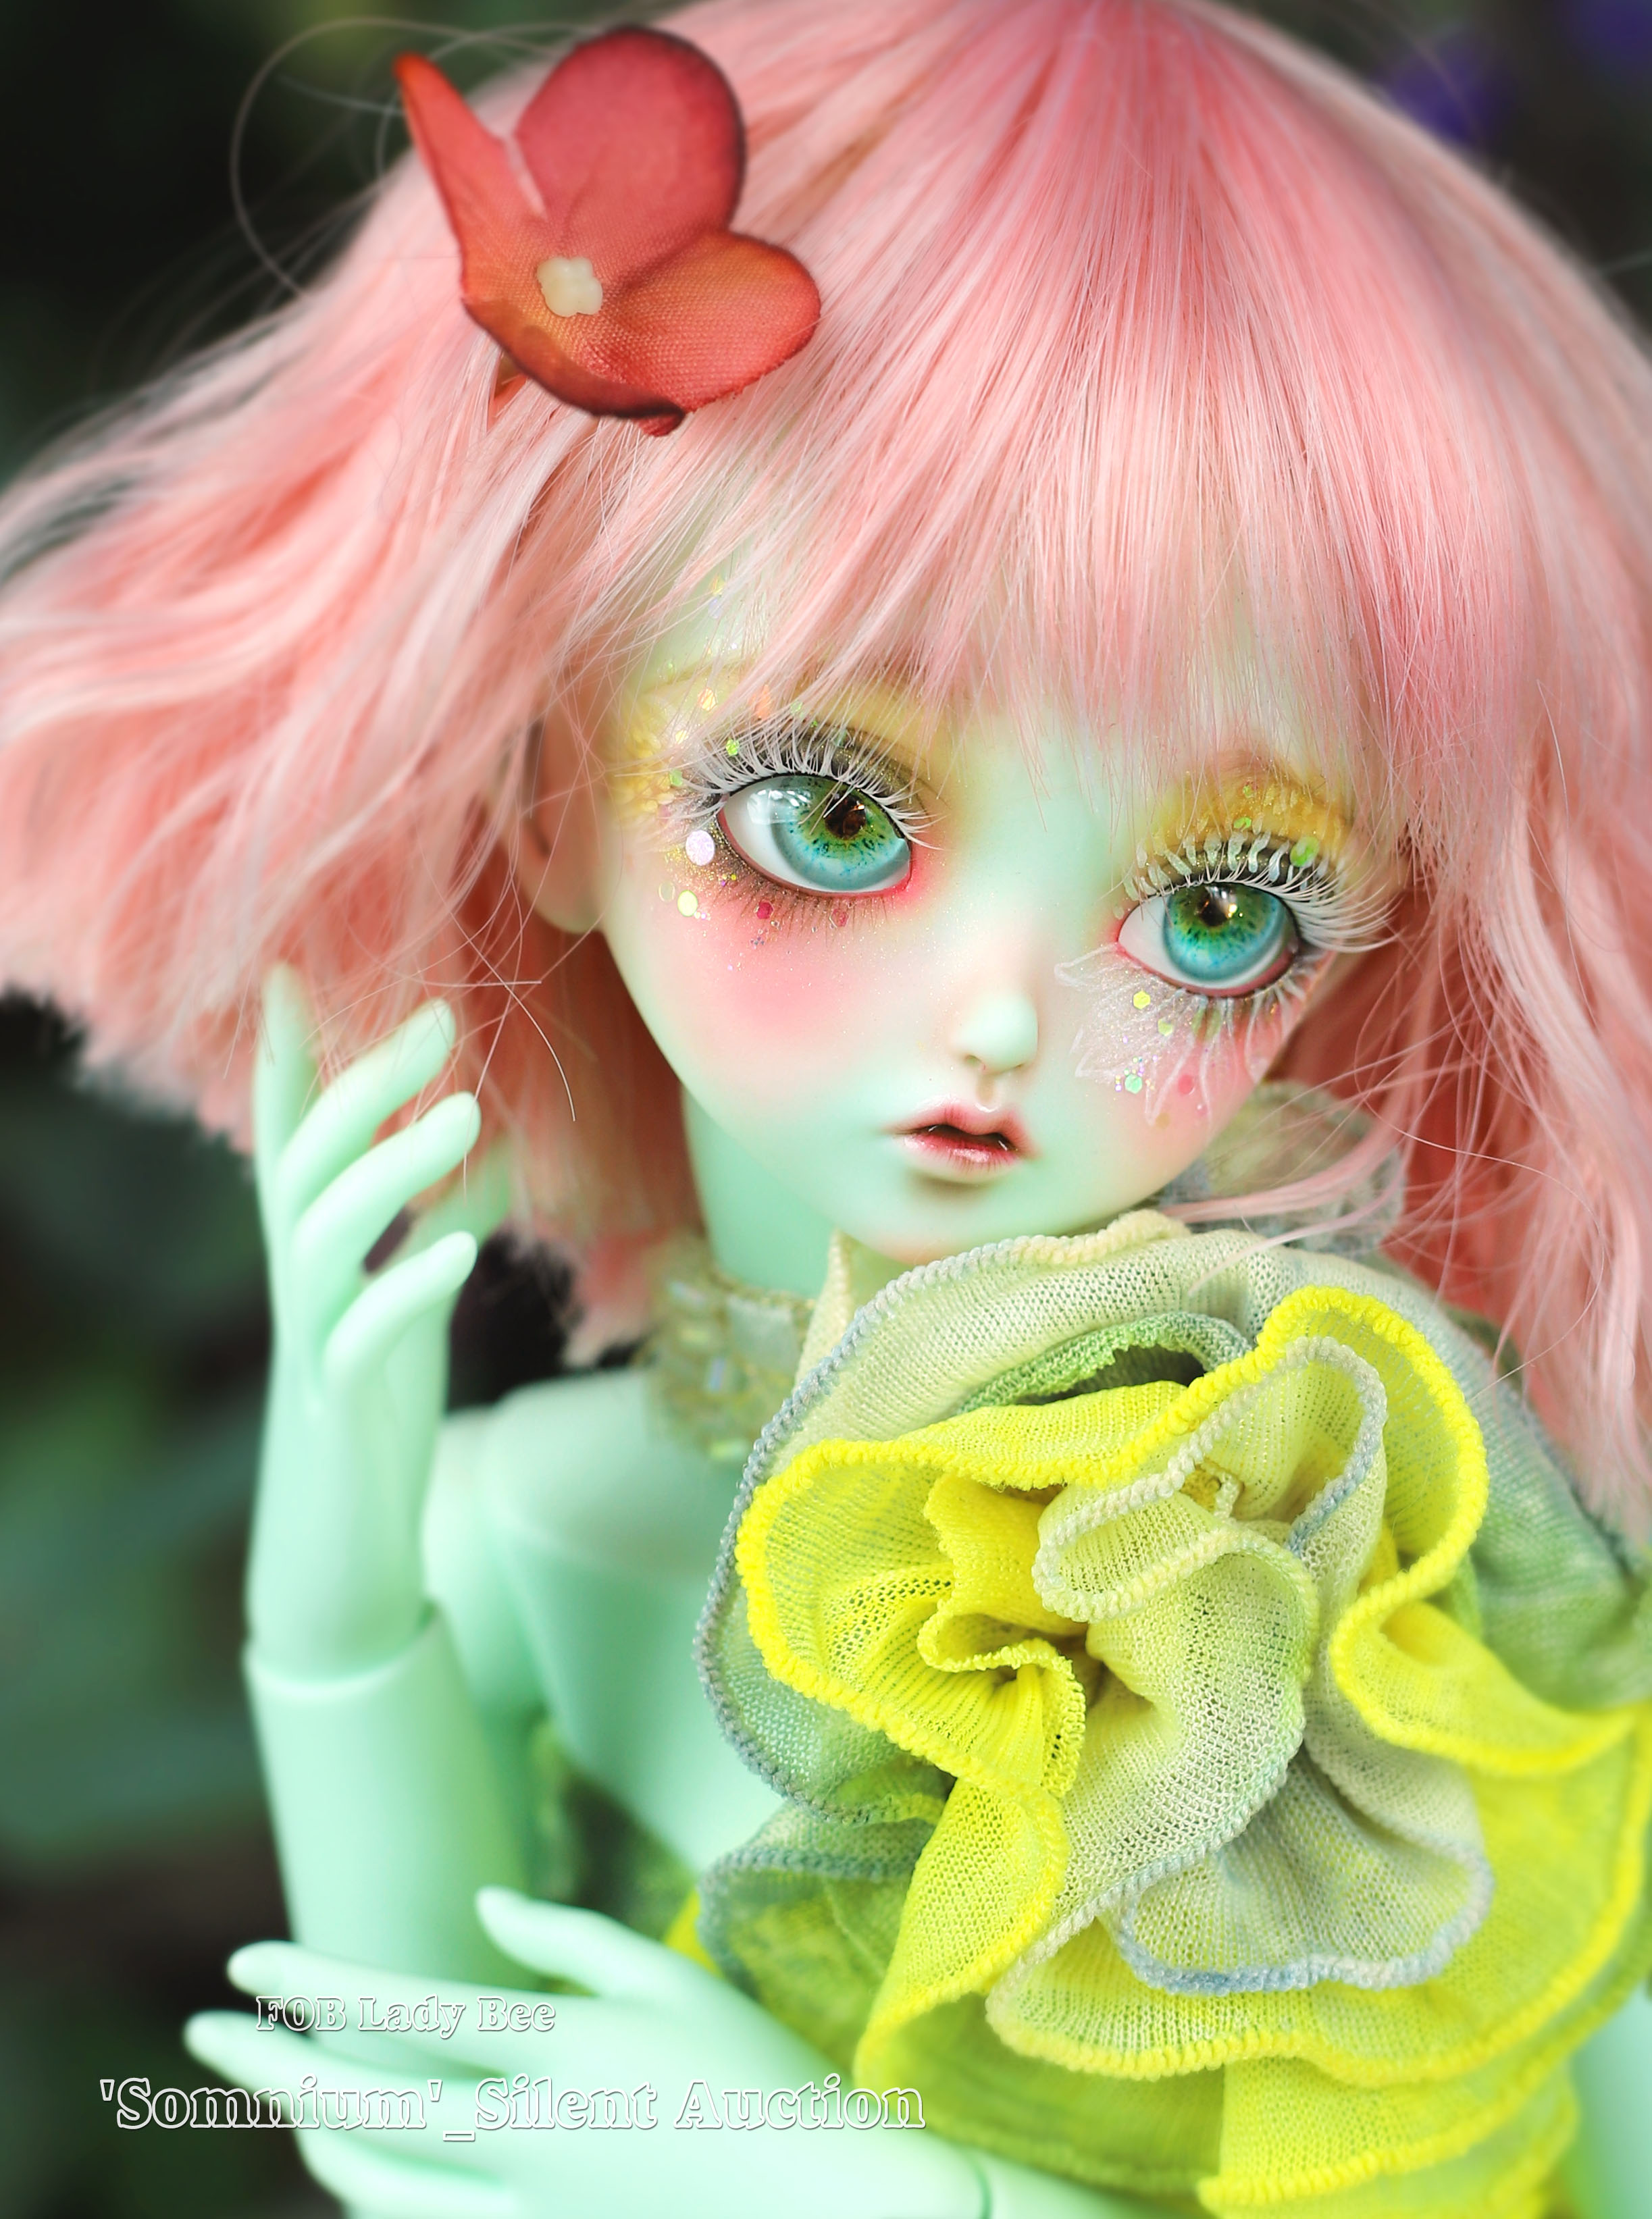 two head + one body bjd sd dolls The Moon and The Star without any make up 